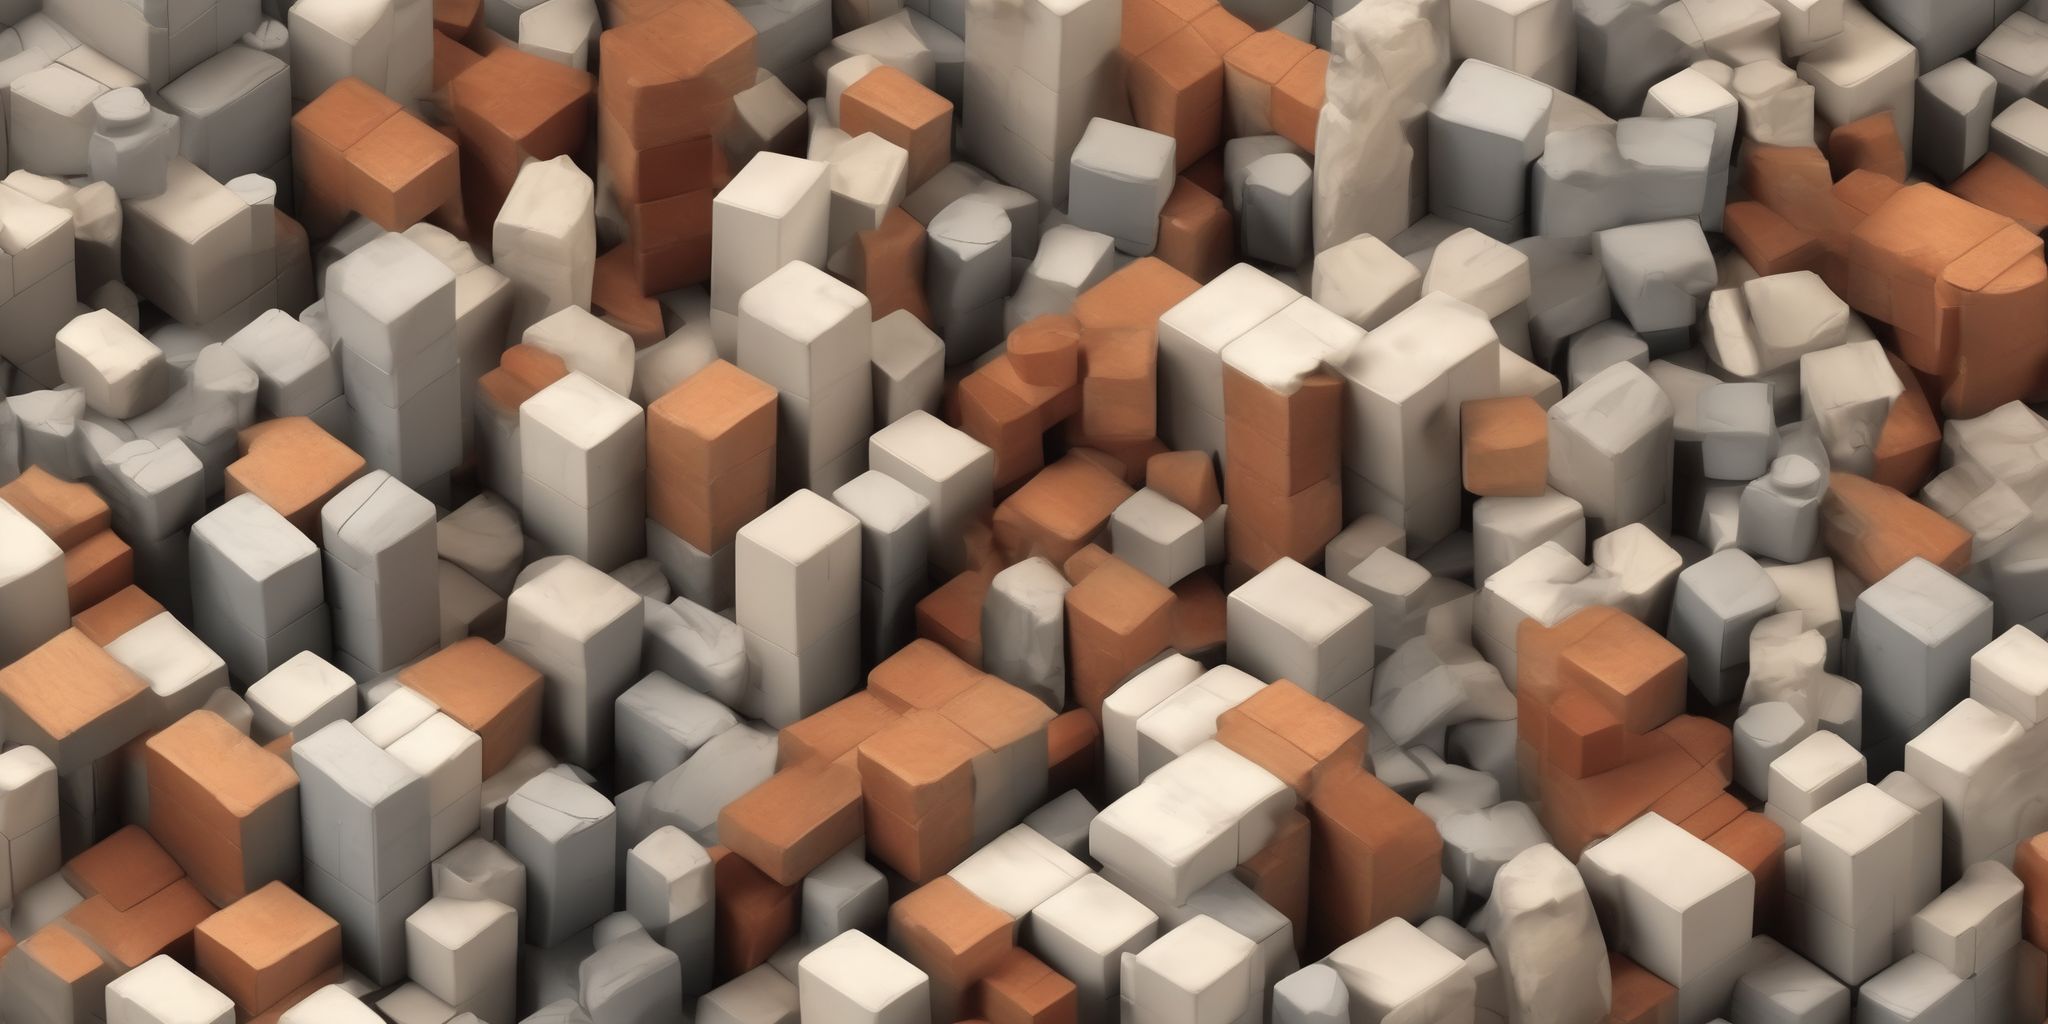 Building blocks  in realistic, photographic style